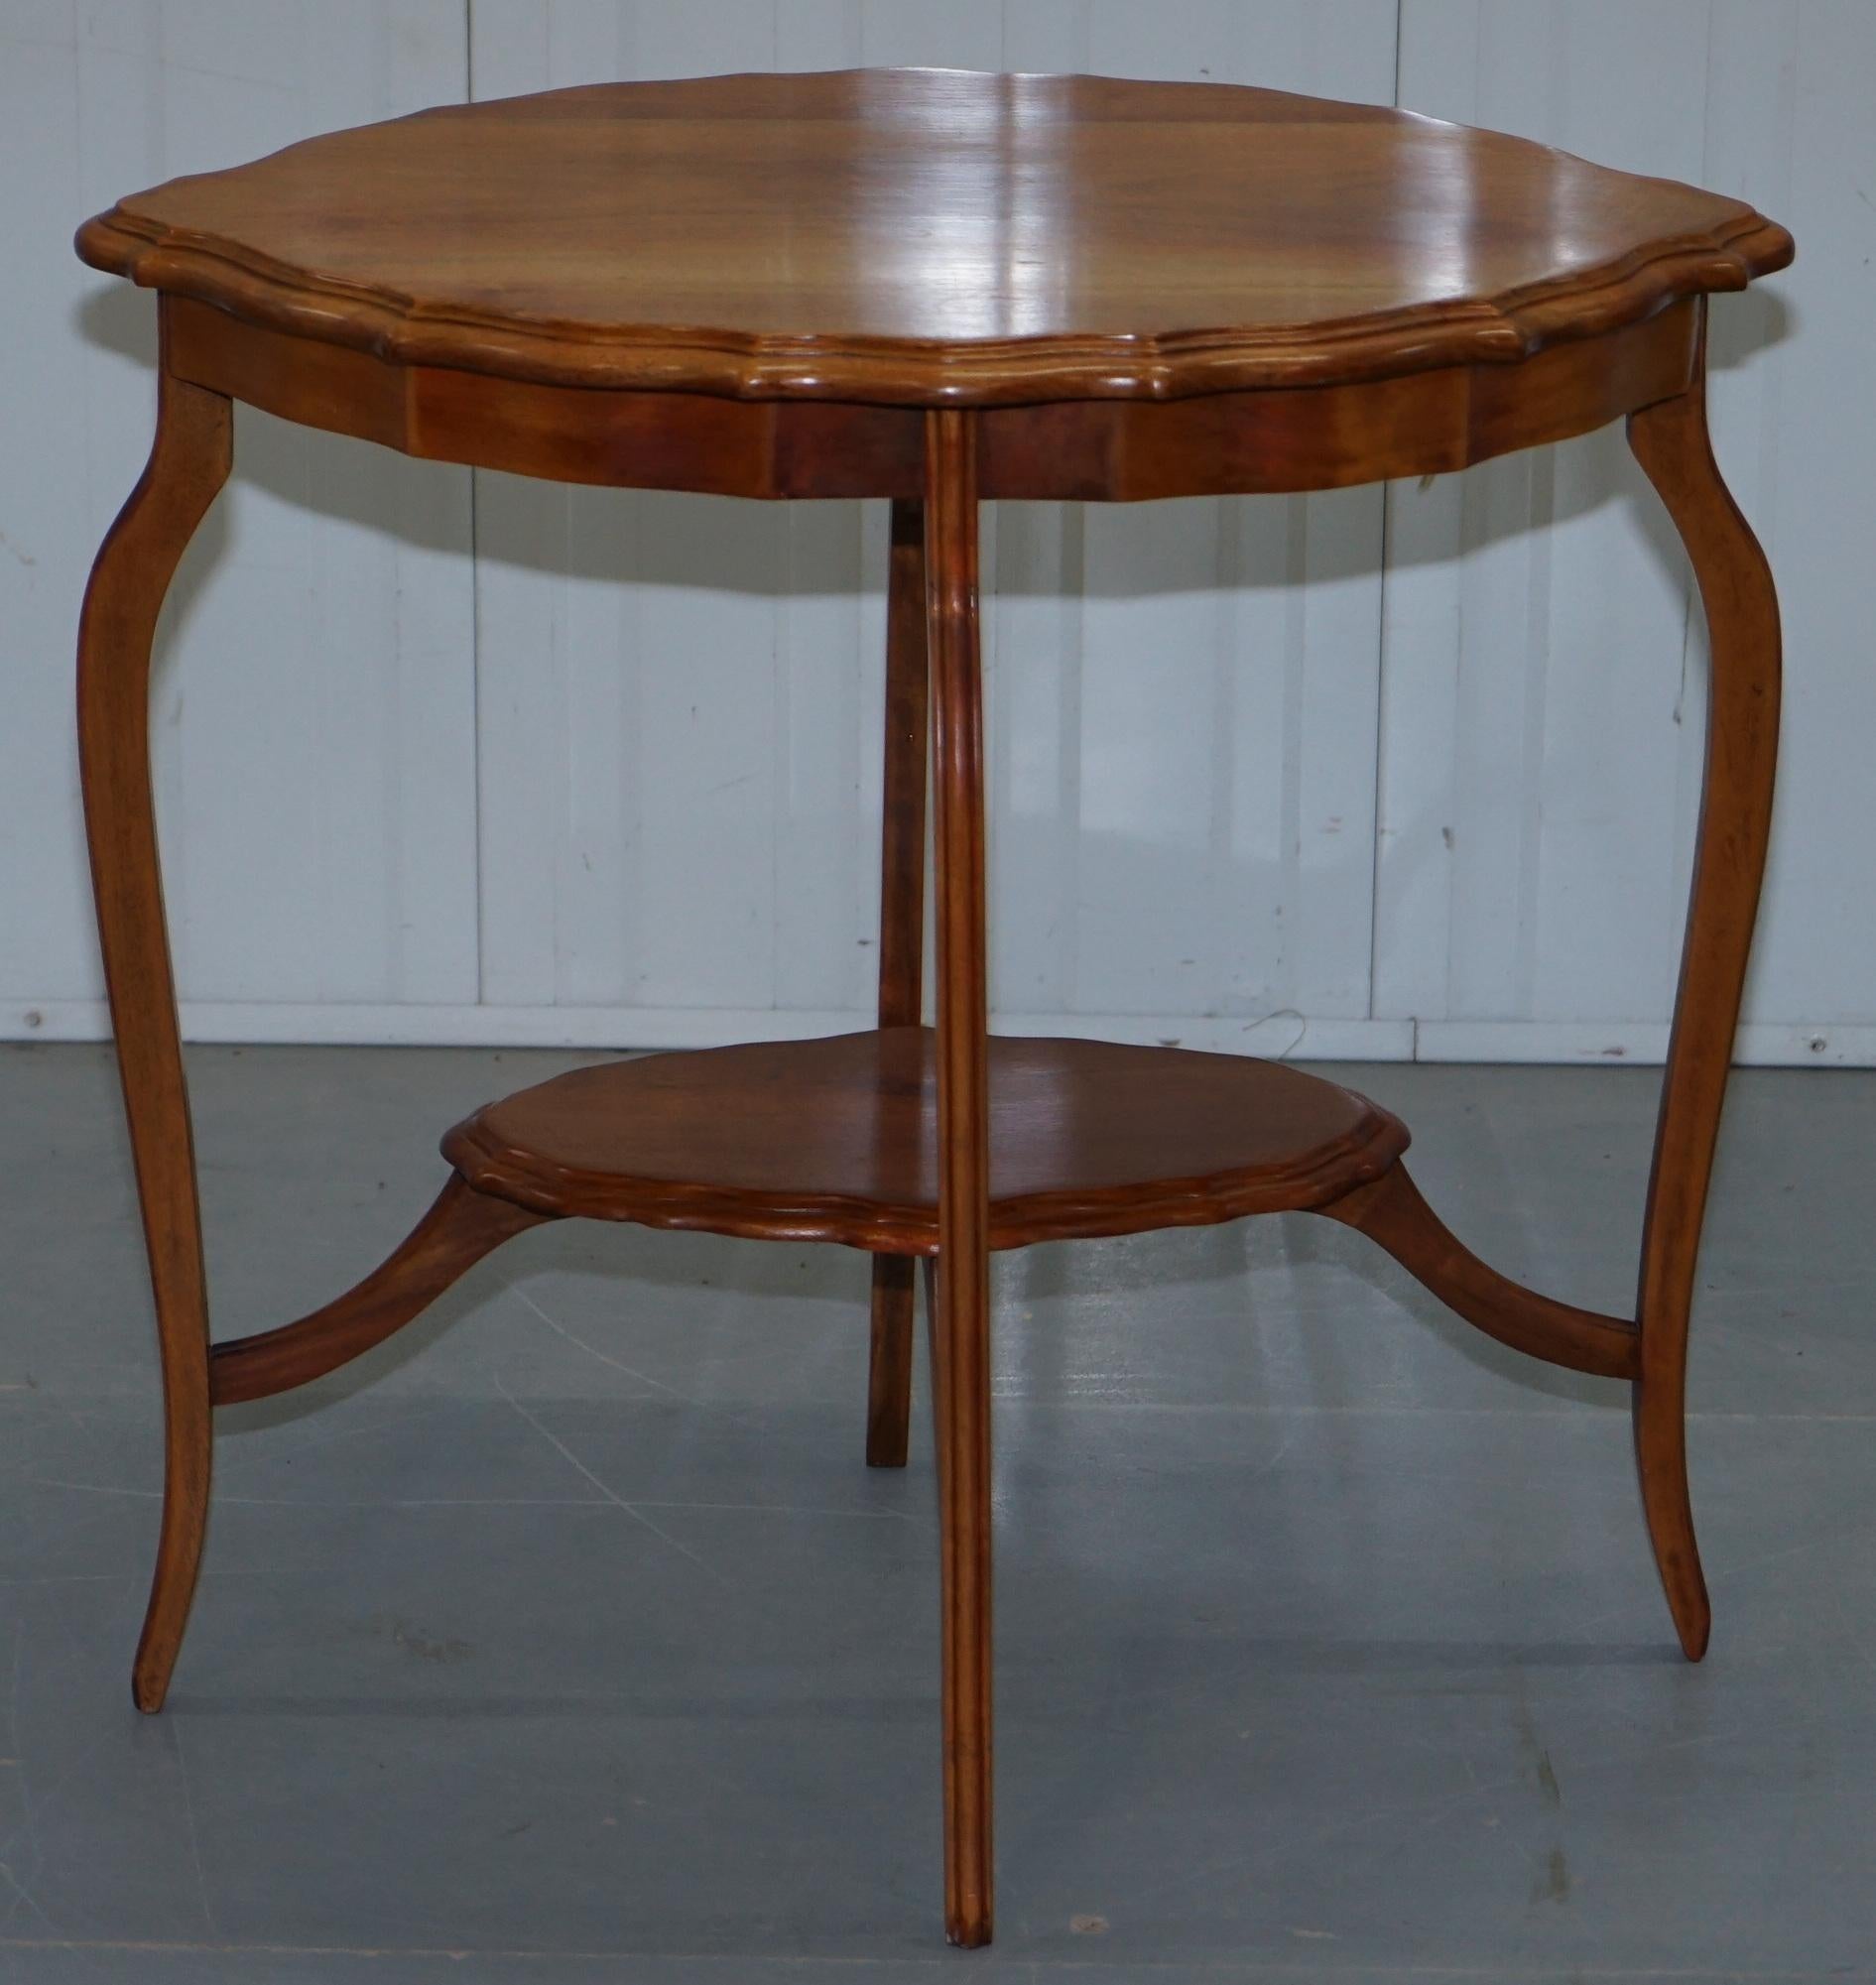 We are delighted to offer for sale this lovely Satinwood occasional centre table 

A good looking decorative and well-made piece in a nice timber, it has a scalloped edge and is a nice form

The top has patina marks and colour variations, we